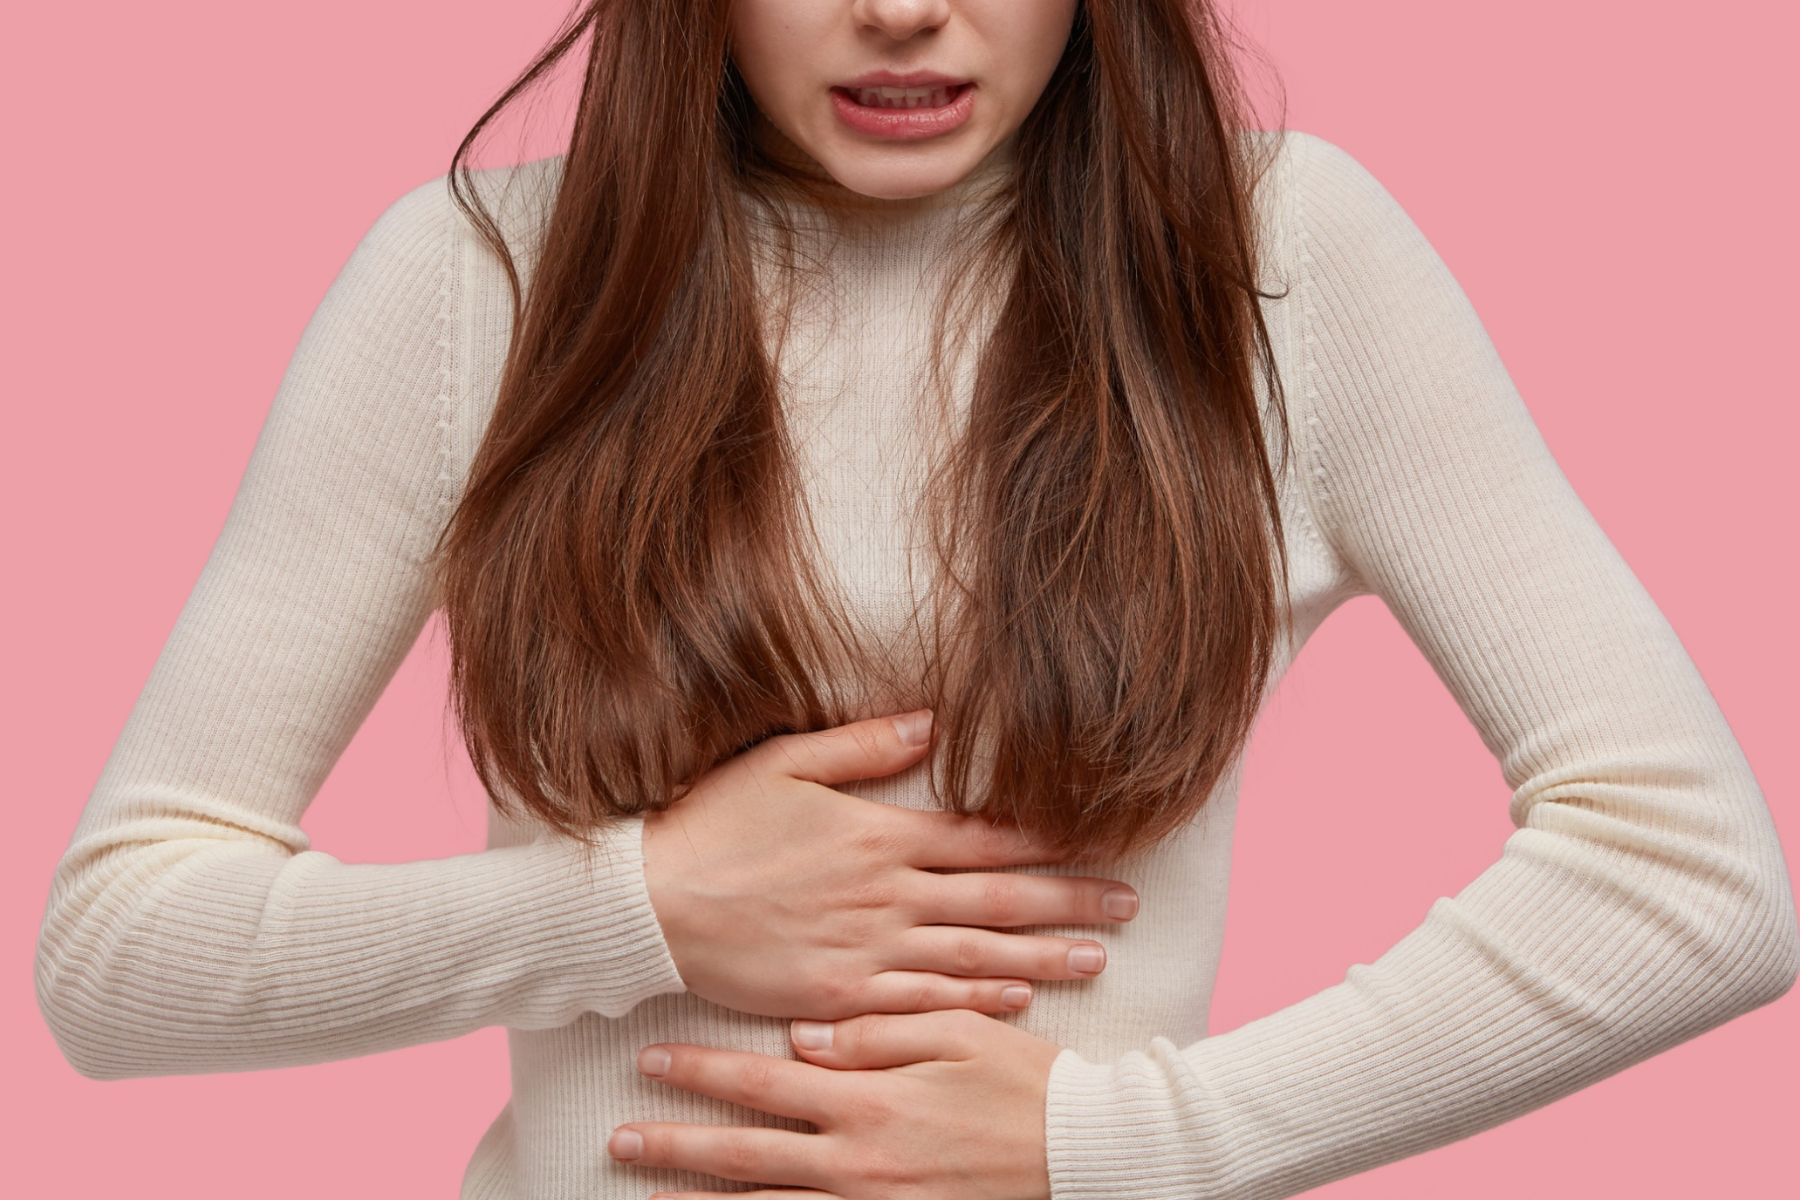 women holds her stomach because of pain caused by IBS